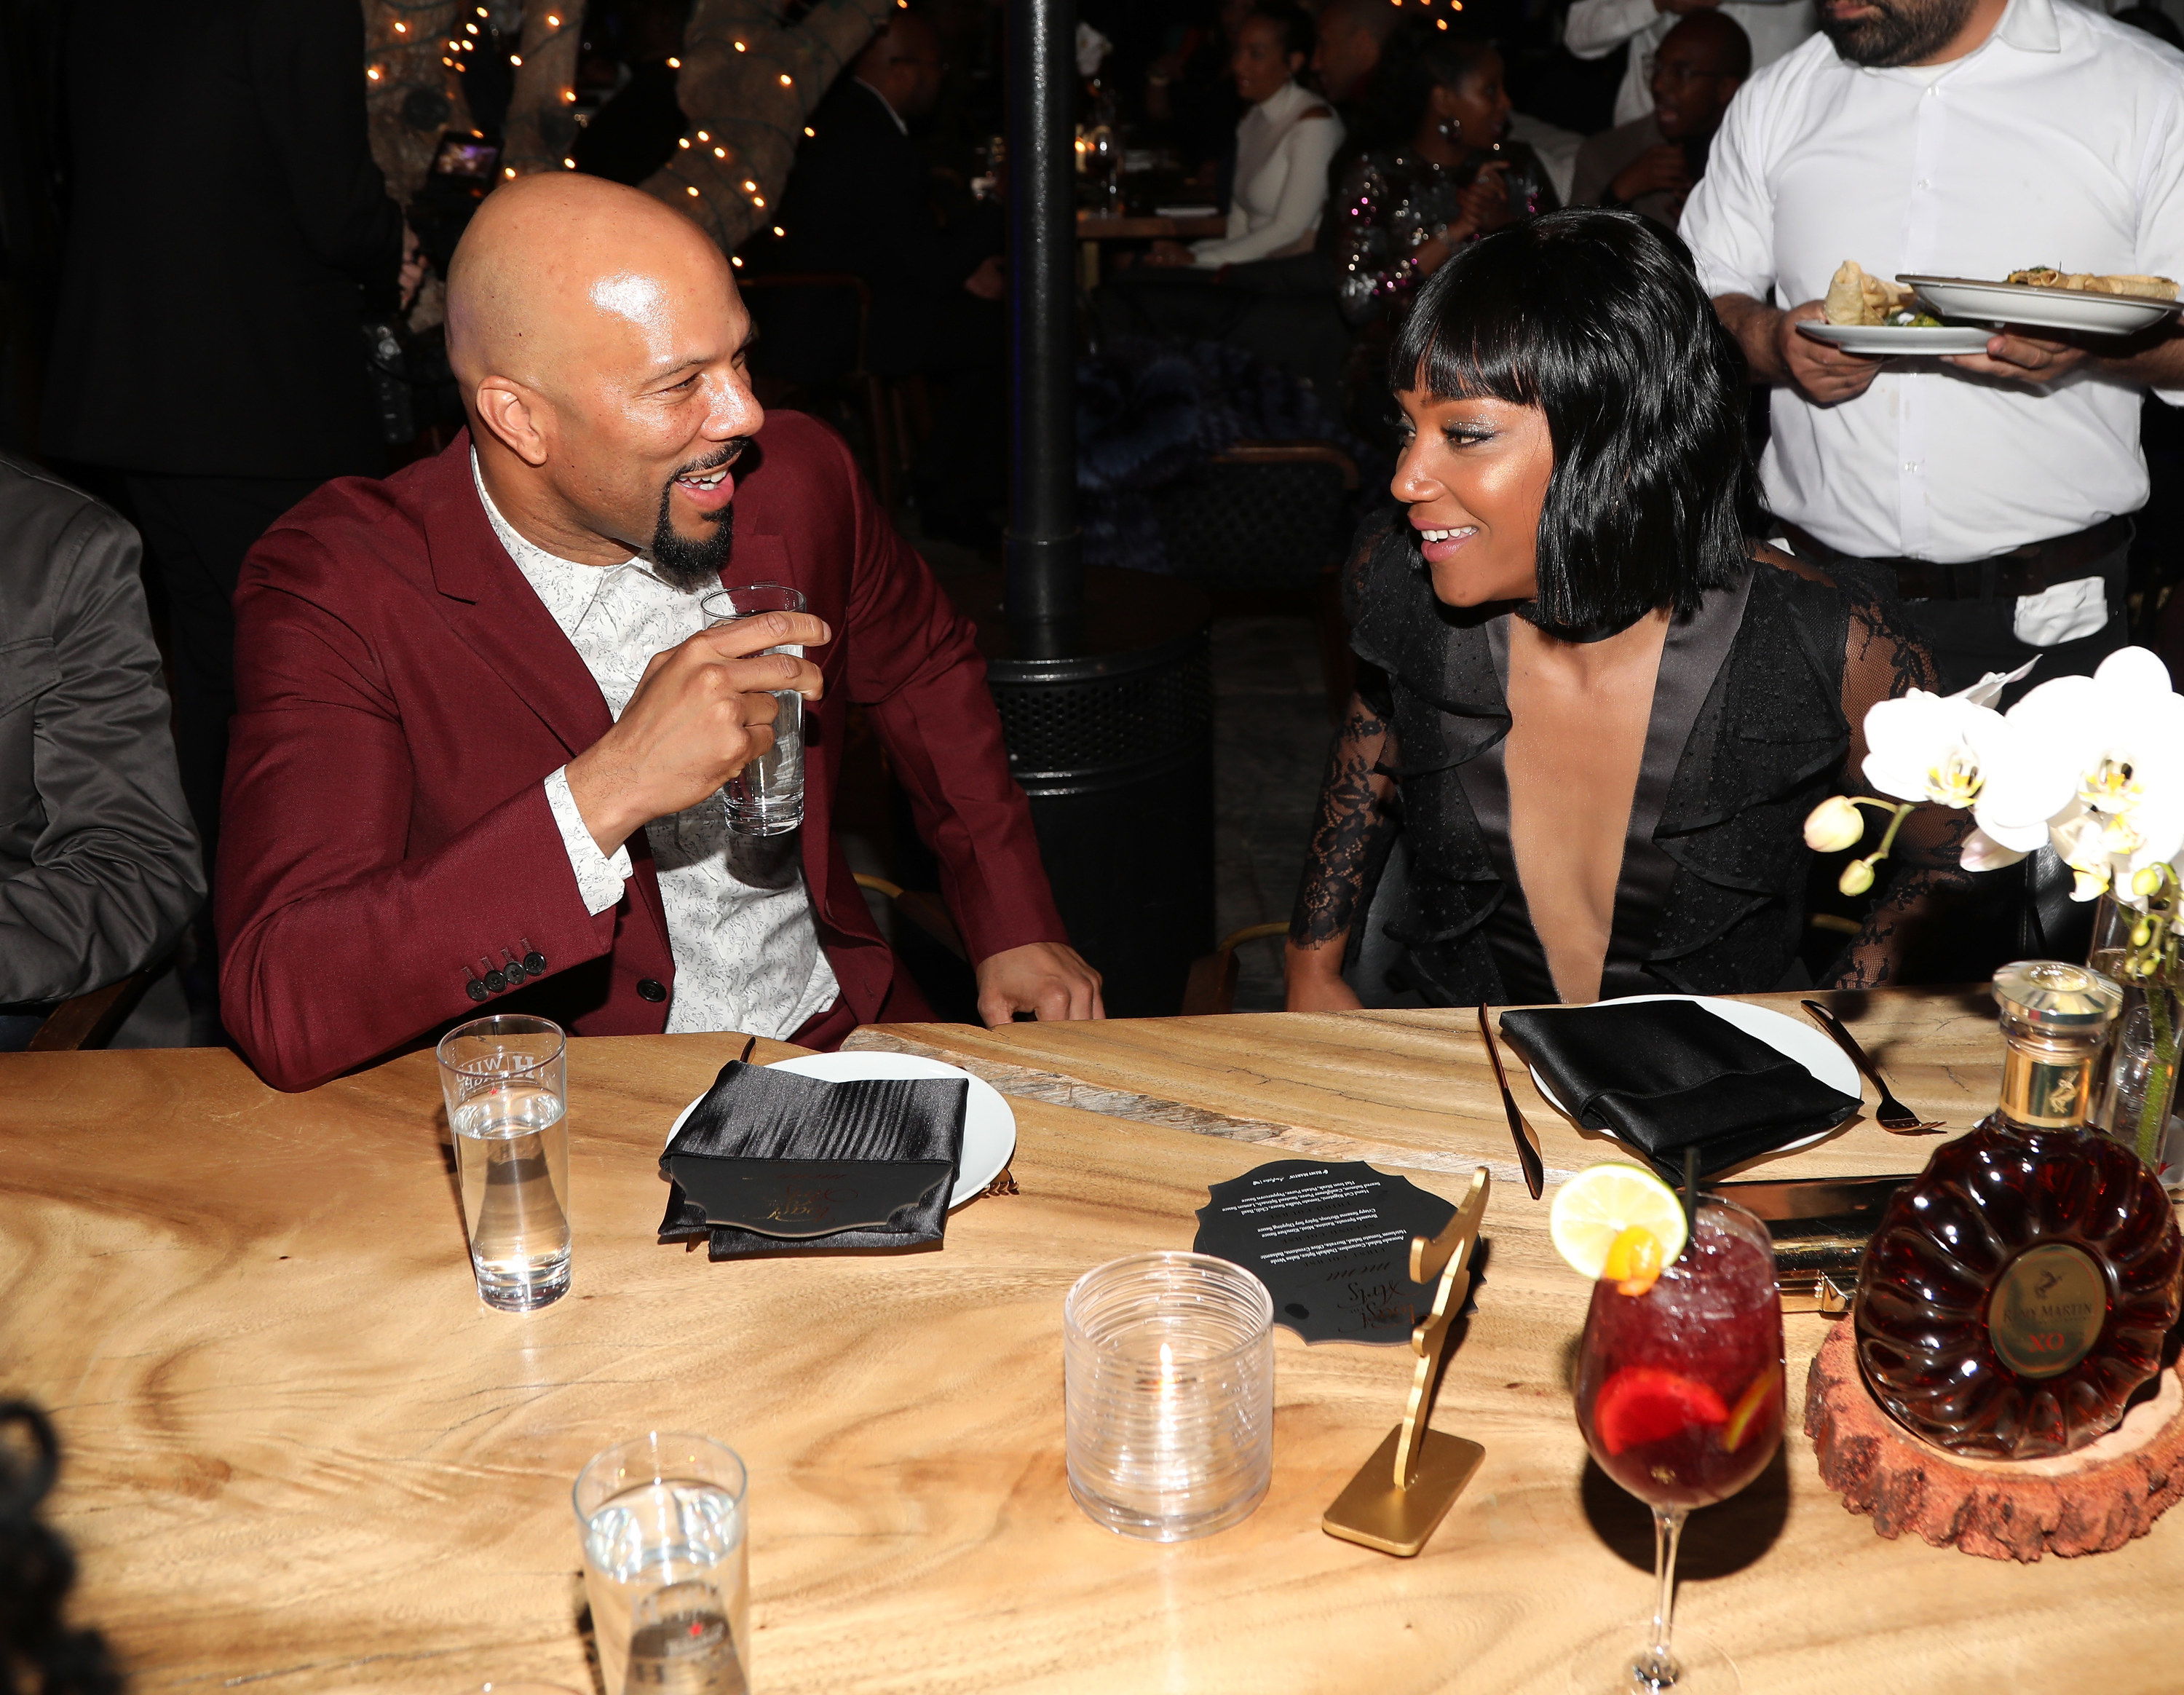 Common and Haddish talk at a table while he holds a glass